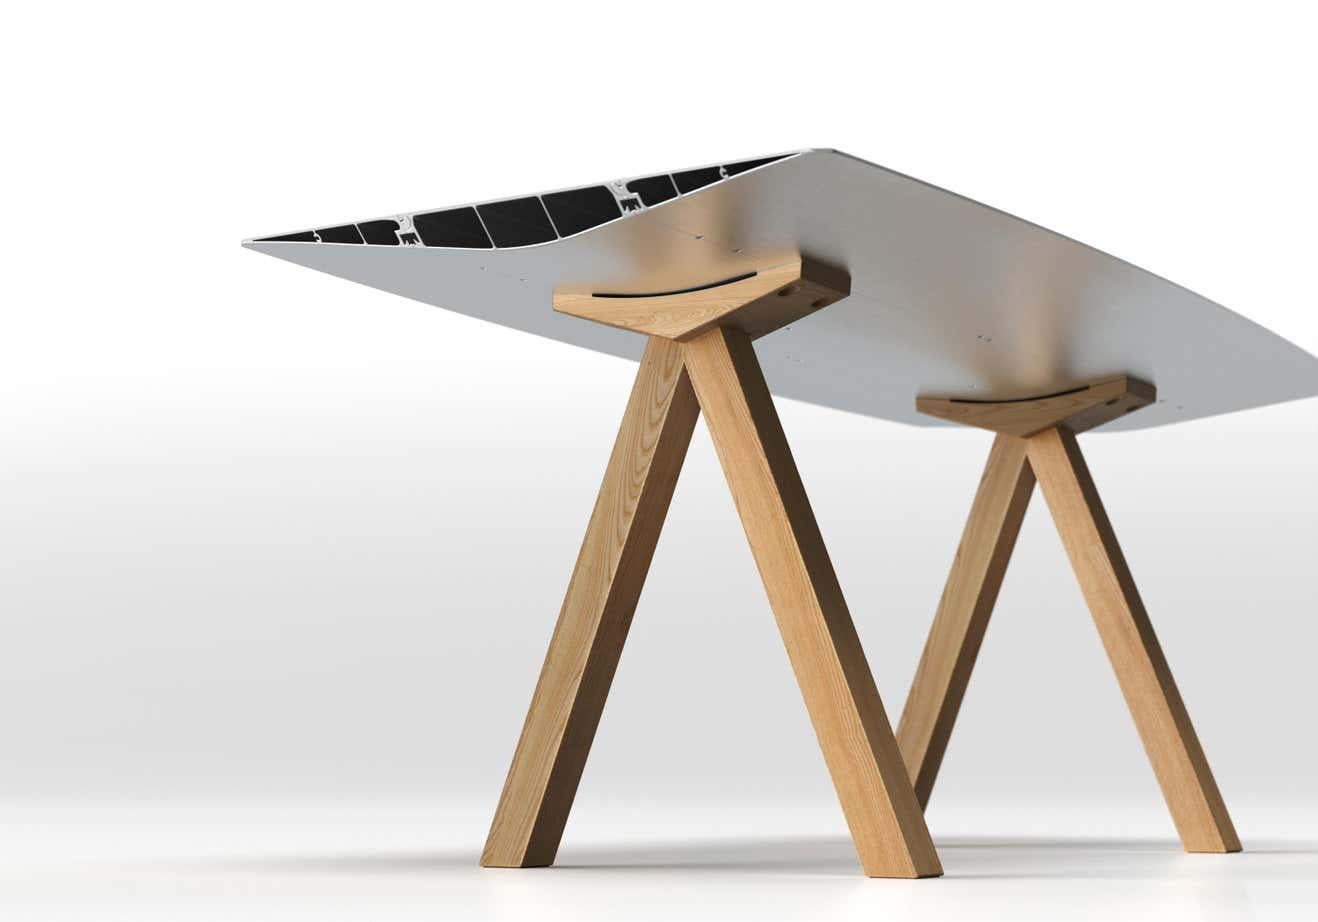 Dinning Table B 90cm x 180cm Aluminum Anodized Silver Top Wooden legs

Materials: 
Aluminium, oak, ash

Dimensions: 
D 90 cm x W 180 cm x H 74 cm

The Table B, which inaugurated the Extrusions Collection in 2009, can reach up to five metres